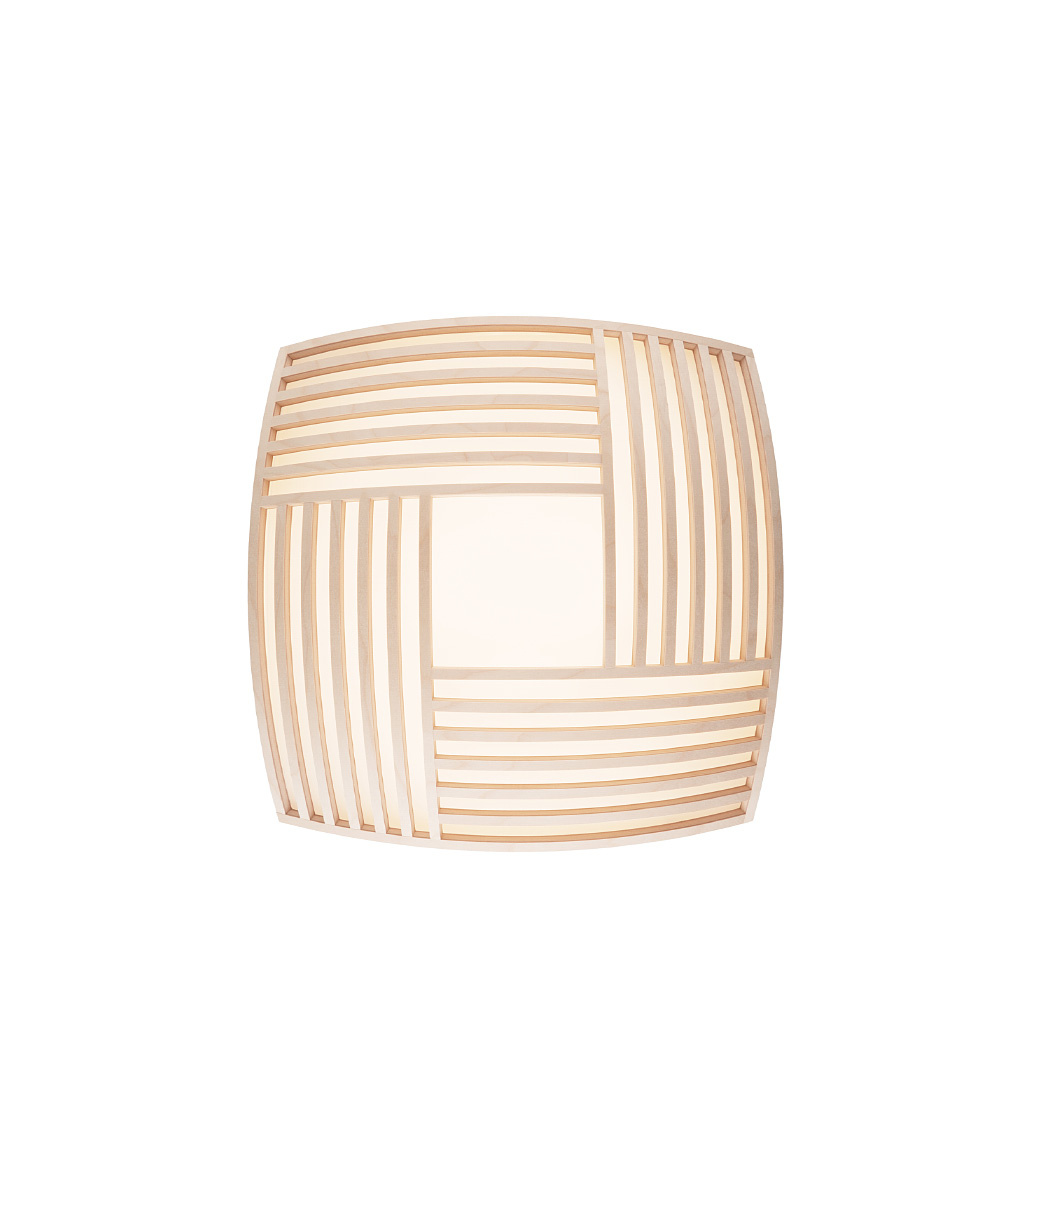 Kuulto Small 9101 ceiling lamp is available in natural birch